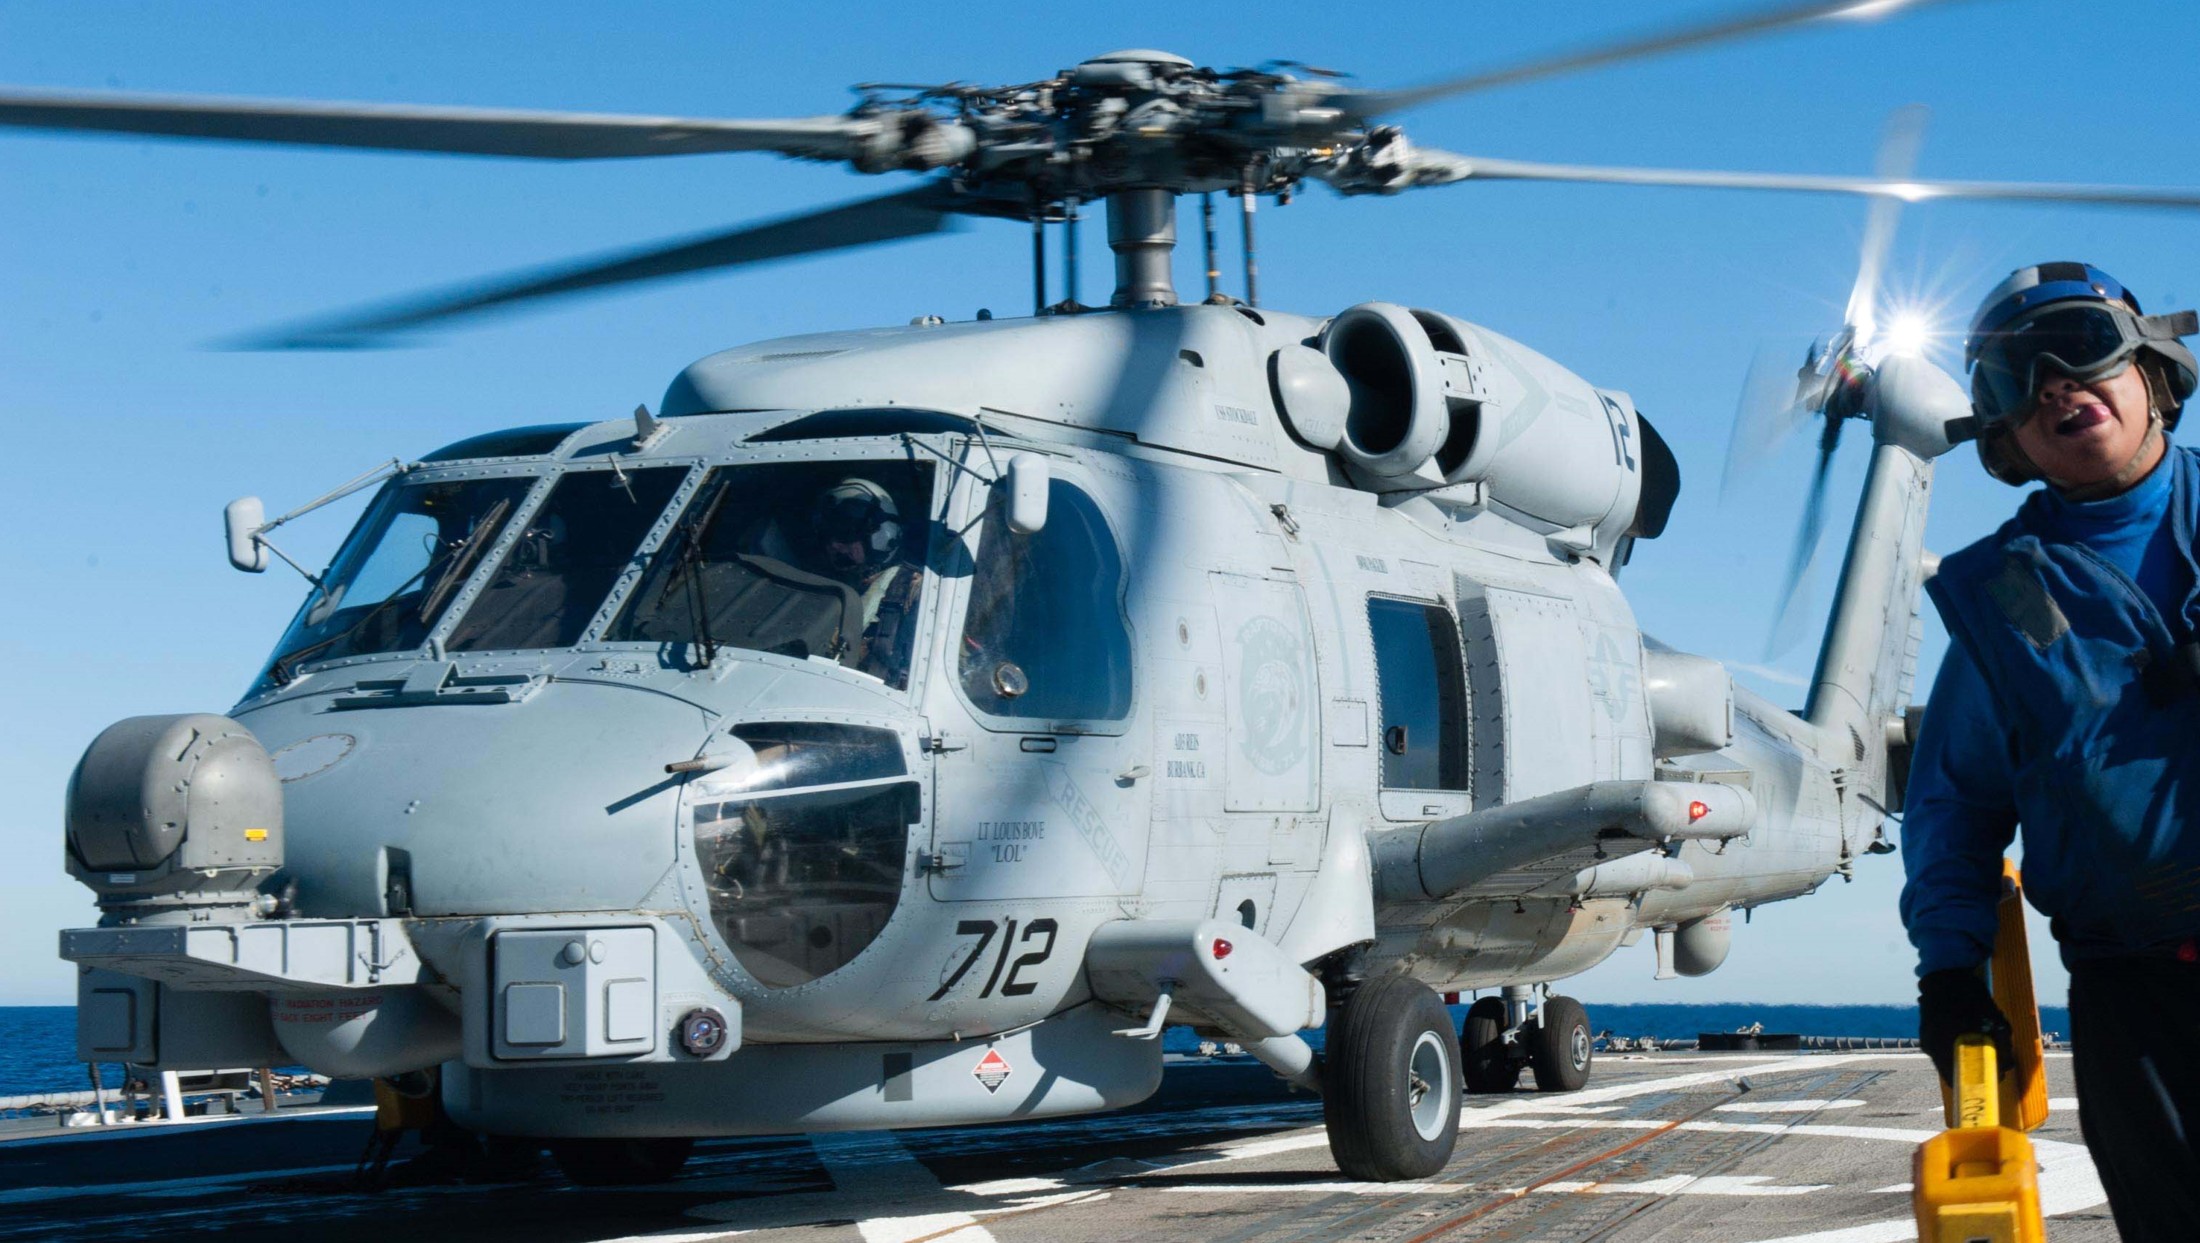 hsm-71 raptors helicopter maritime strike squadron mh-60r seahawk navy 2015 09 uss chung-hoon ddg-93